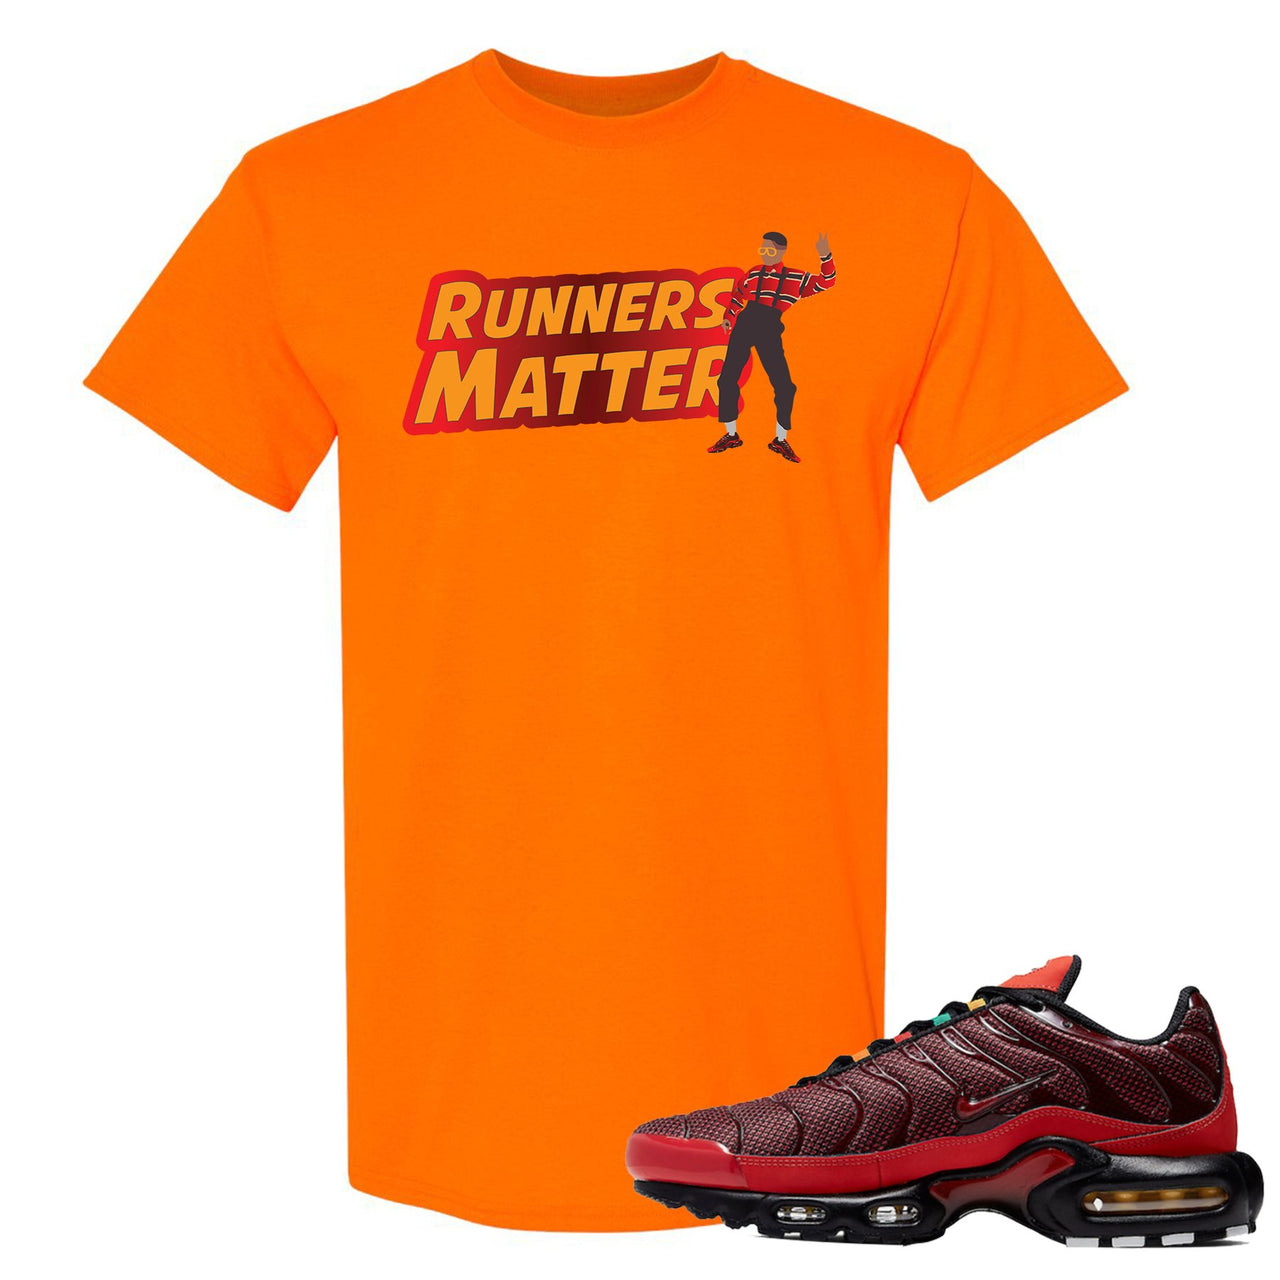 printed on the front of the air max plus sunburst sneaker matching orange tee shirt is the runners matter logo